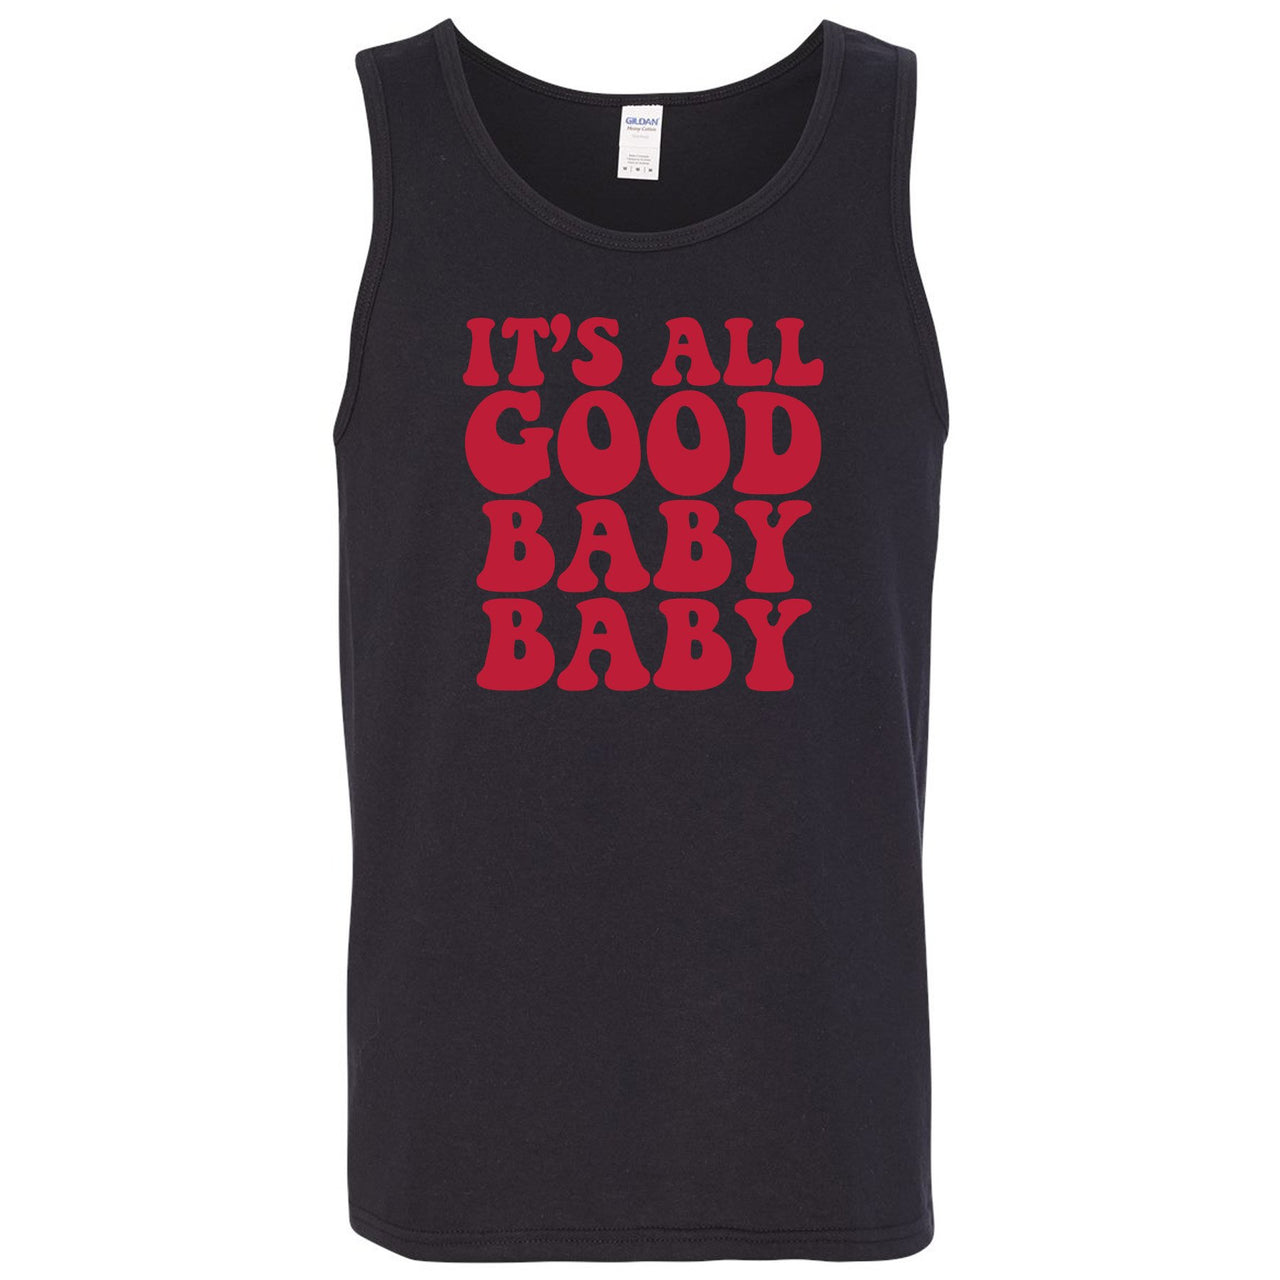 Reflections of a Champion 7s Mens Tank Top | It's All Good Baby Baby, Black